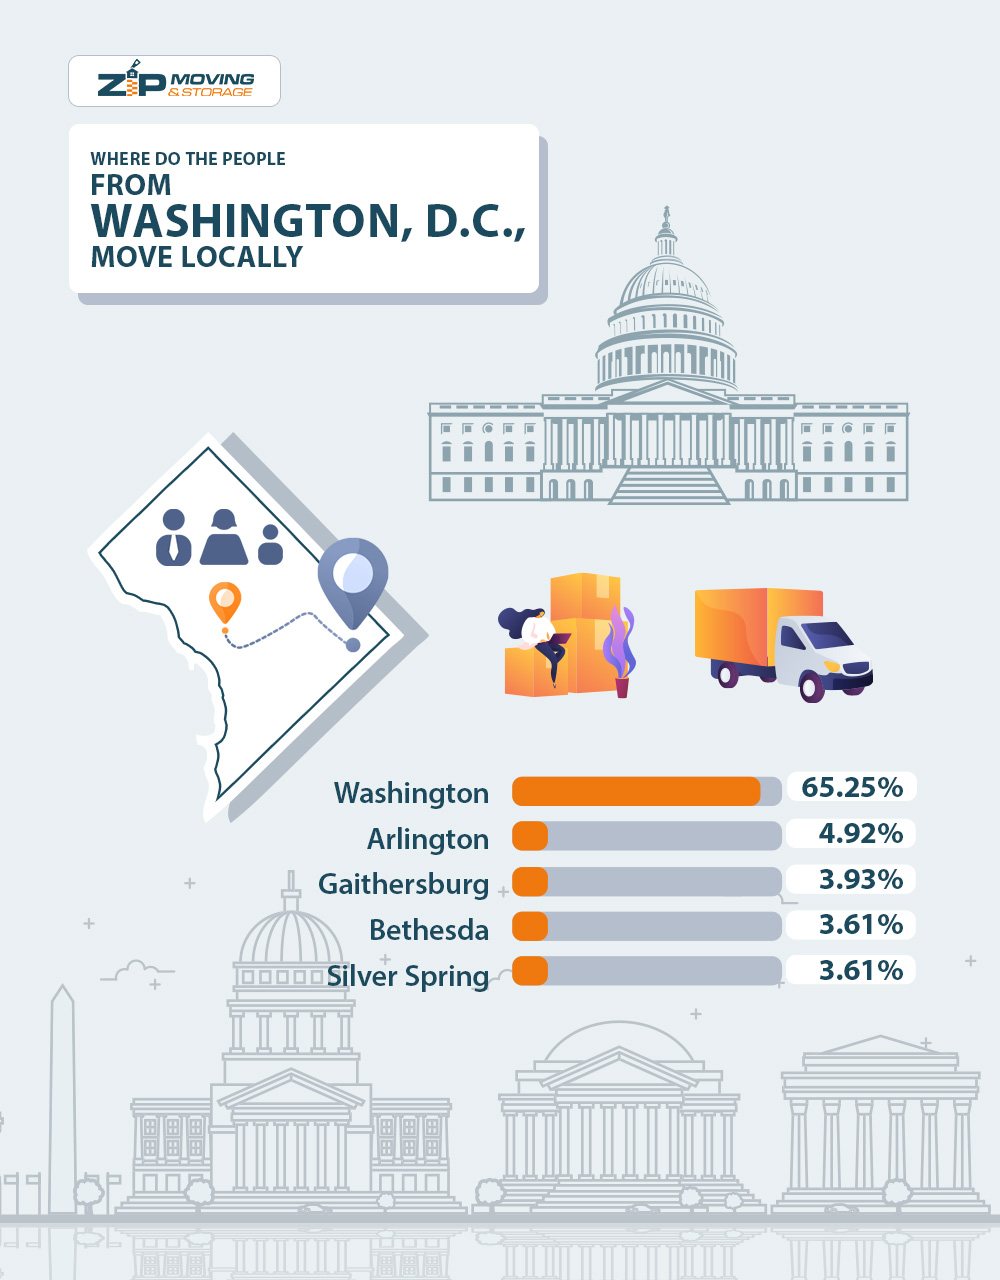 Where do the people from Washington, D.C., move locally?